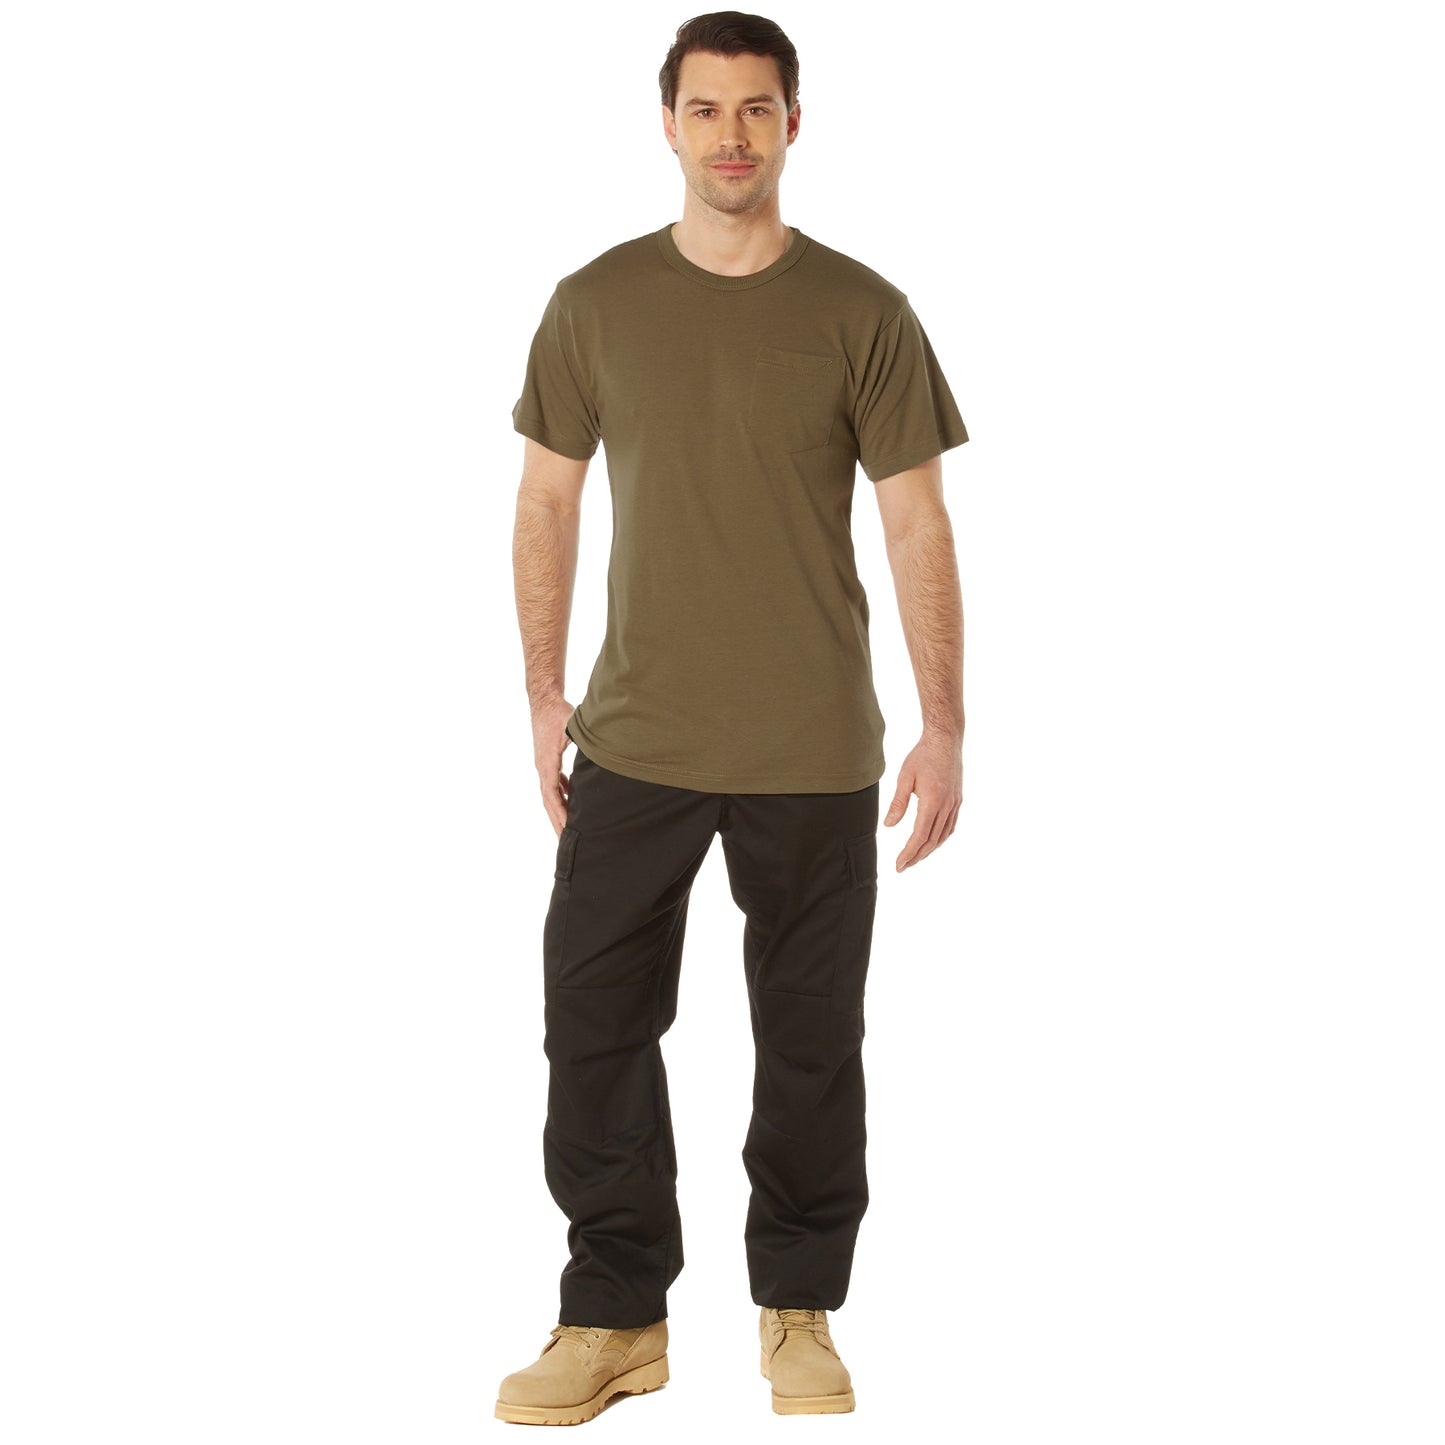 Rothco Men's Pocket T-Shirt Casual Tee Cotton Polyester